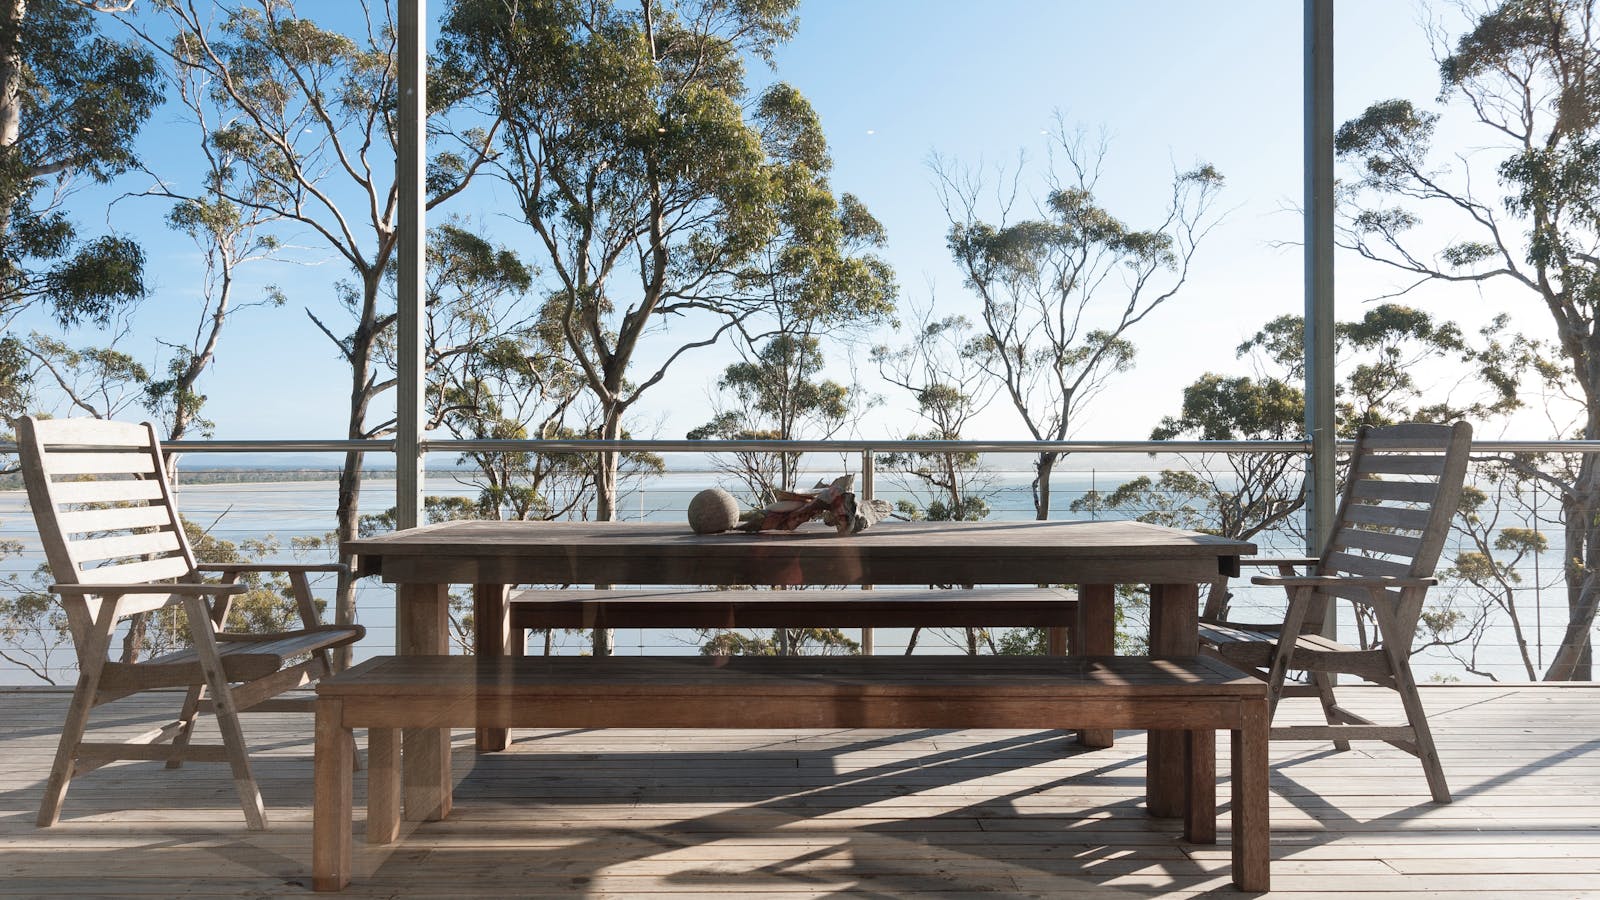 Enjoy an alfresco meal overlooking the water. What better way to enjoy Tasmania's fabulous produce.